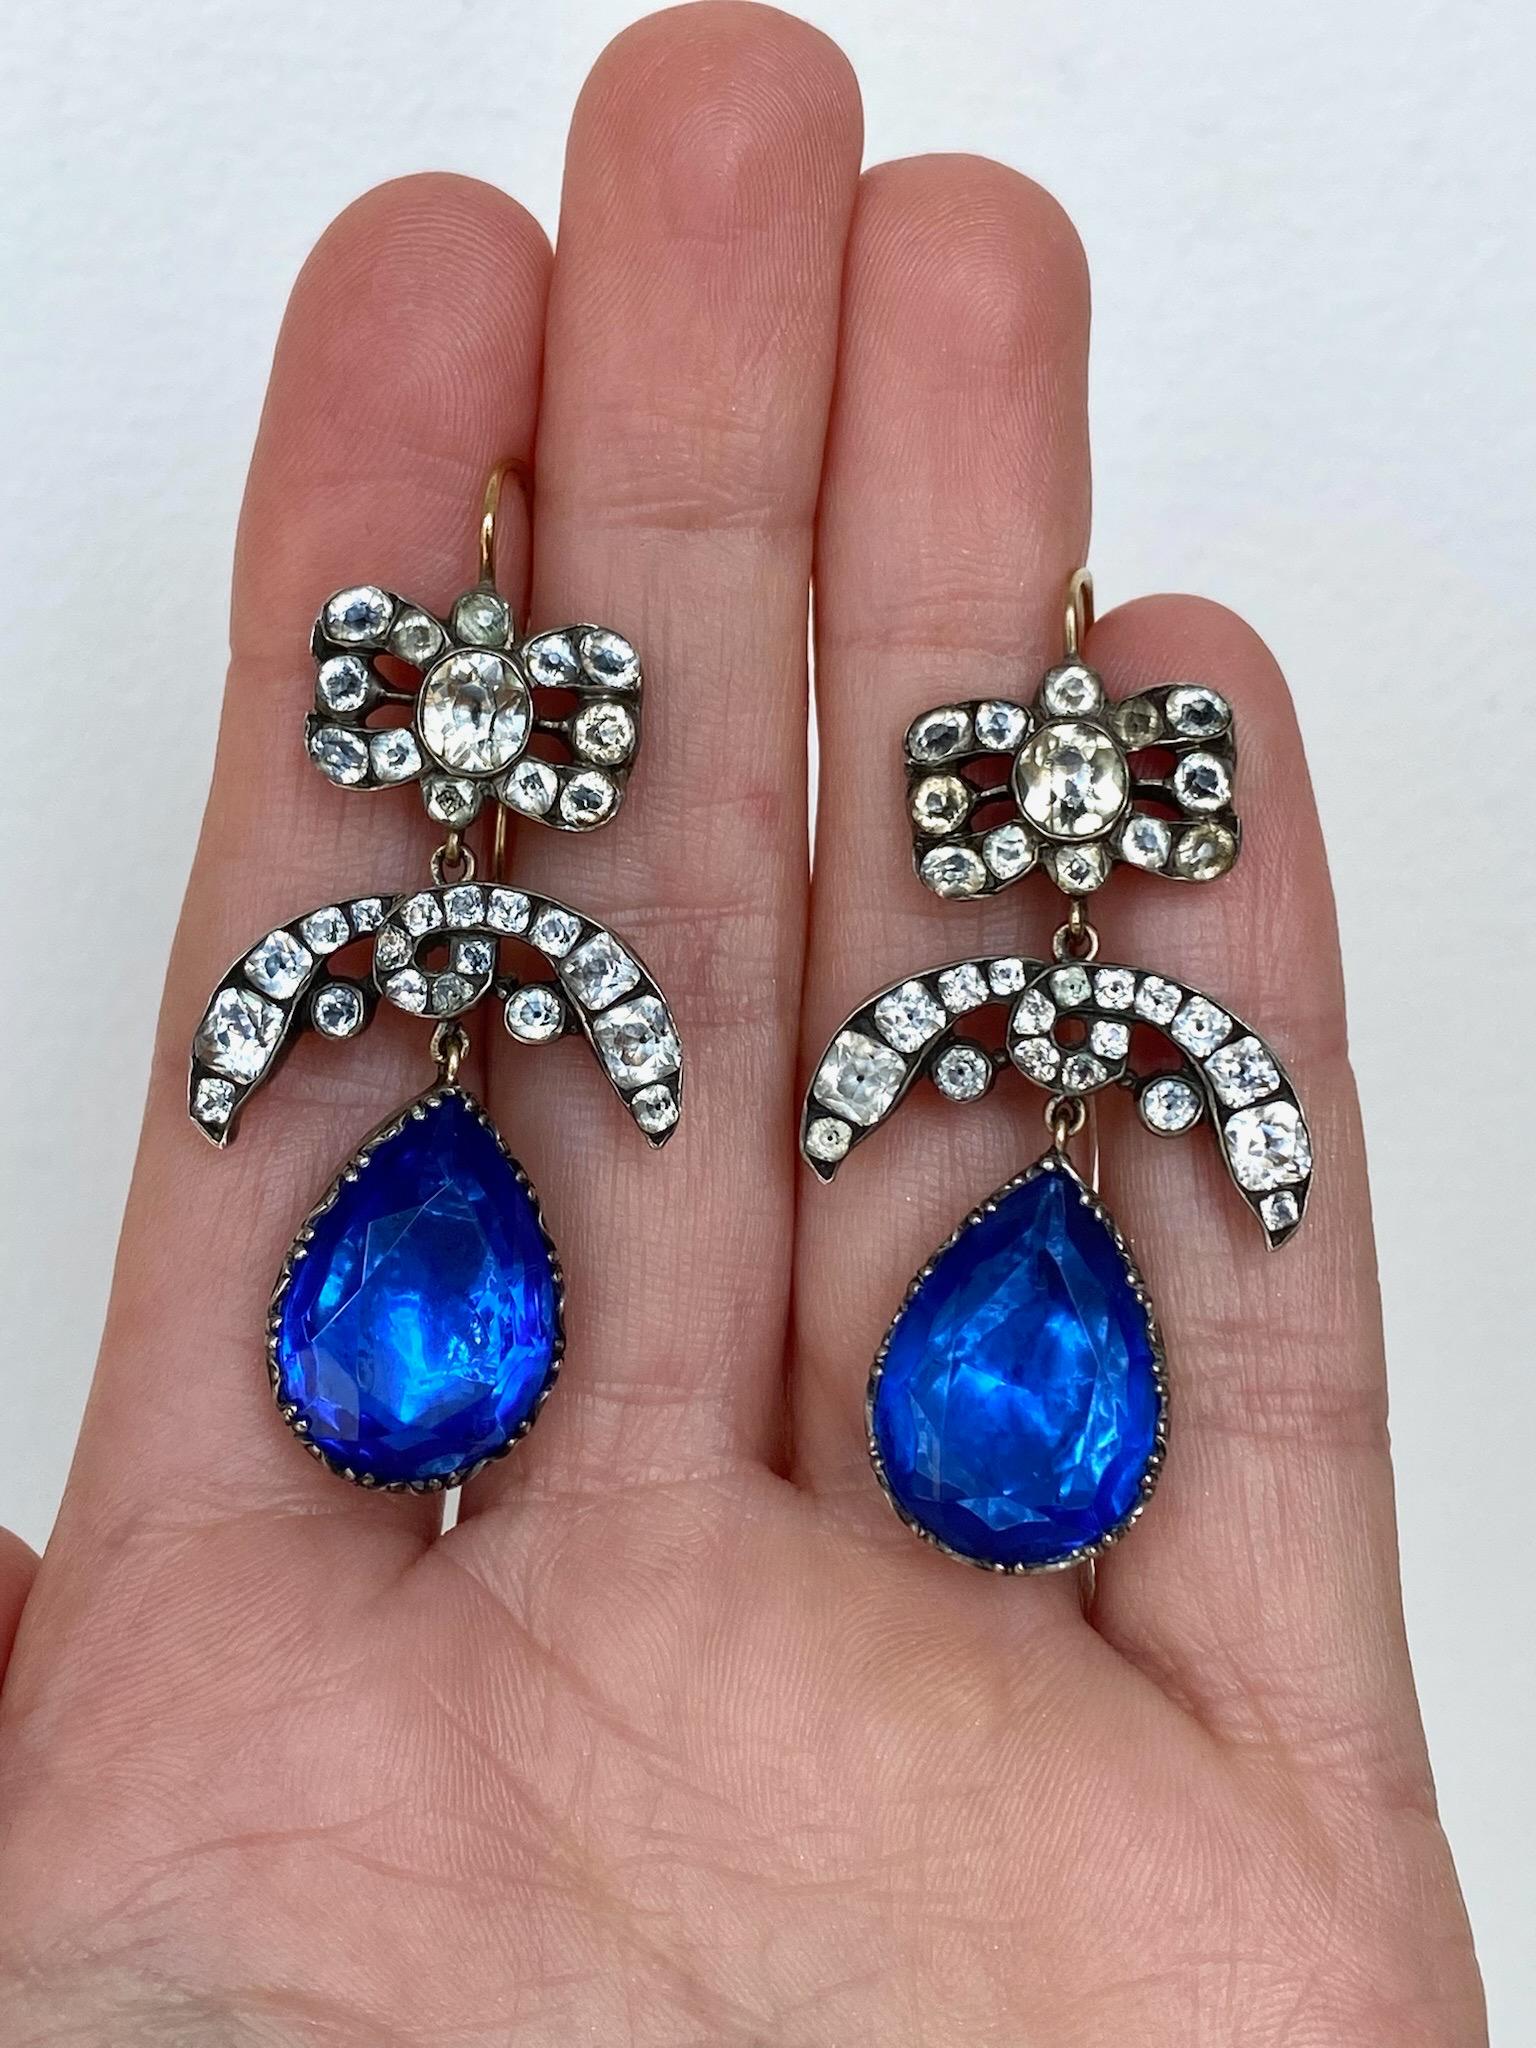 Victorian Antique Silver and Paste Earrings For Sale